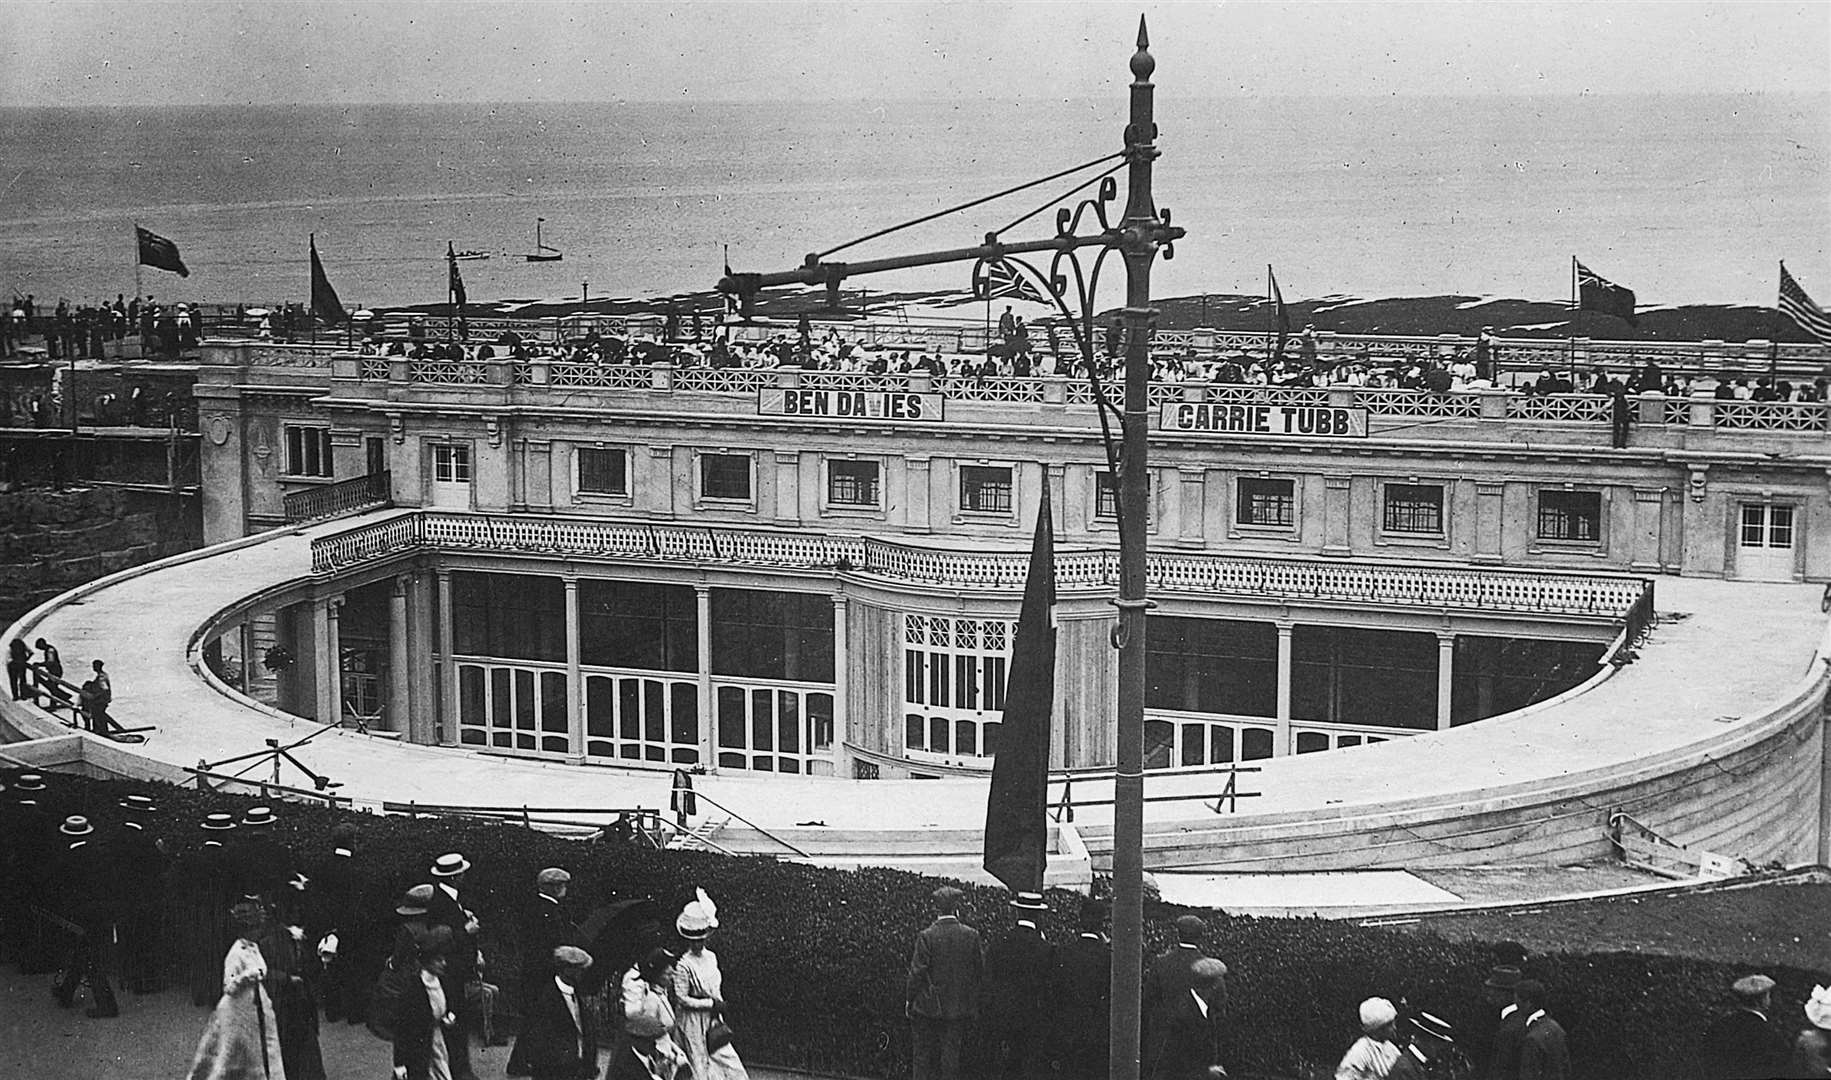 Margate's Winter Gardens was opened to ensure the town's popularity lasted long than just the summer months. Picture: The Marine Series/HS